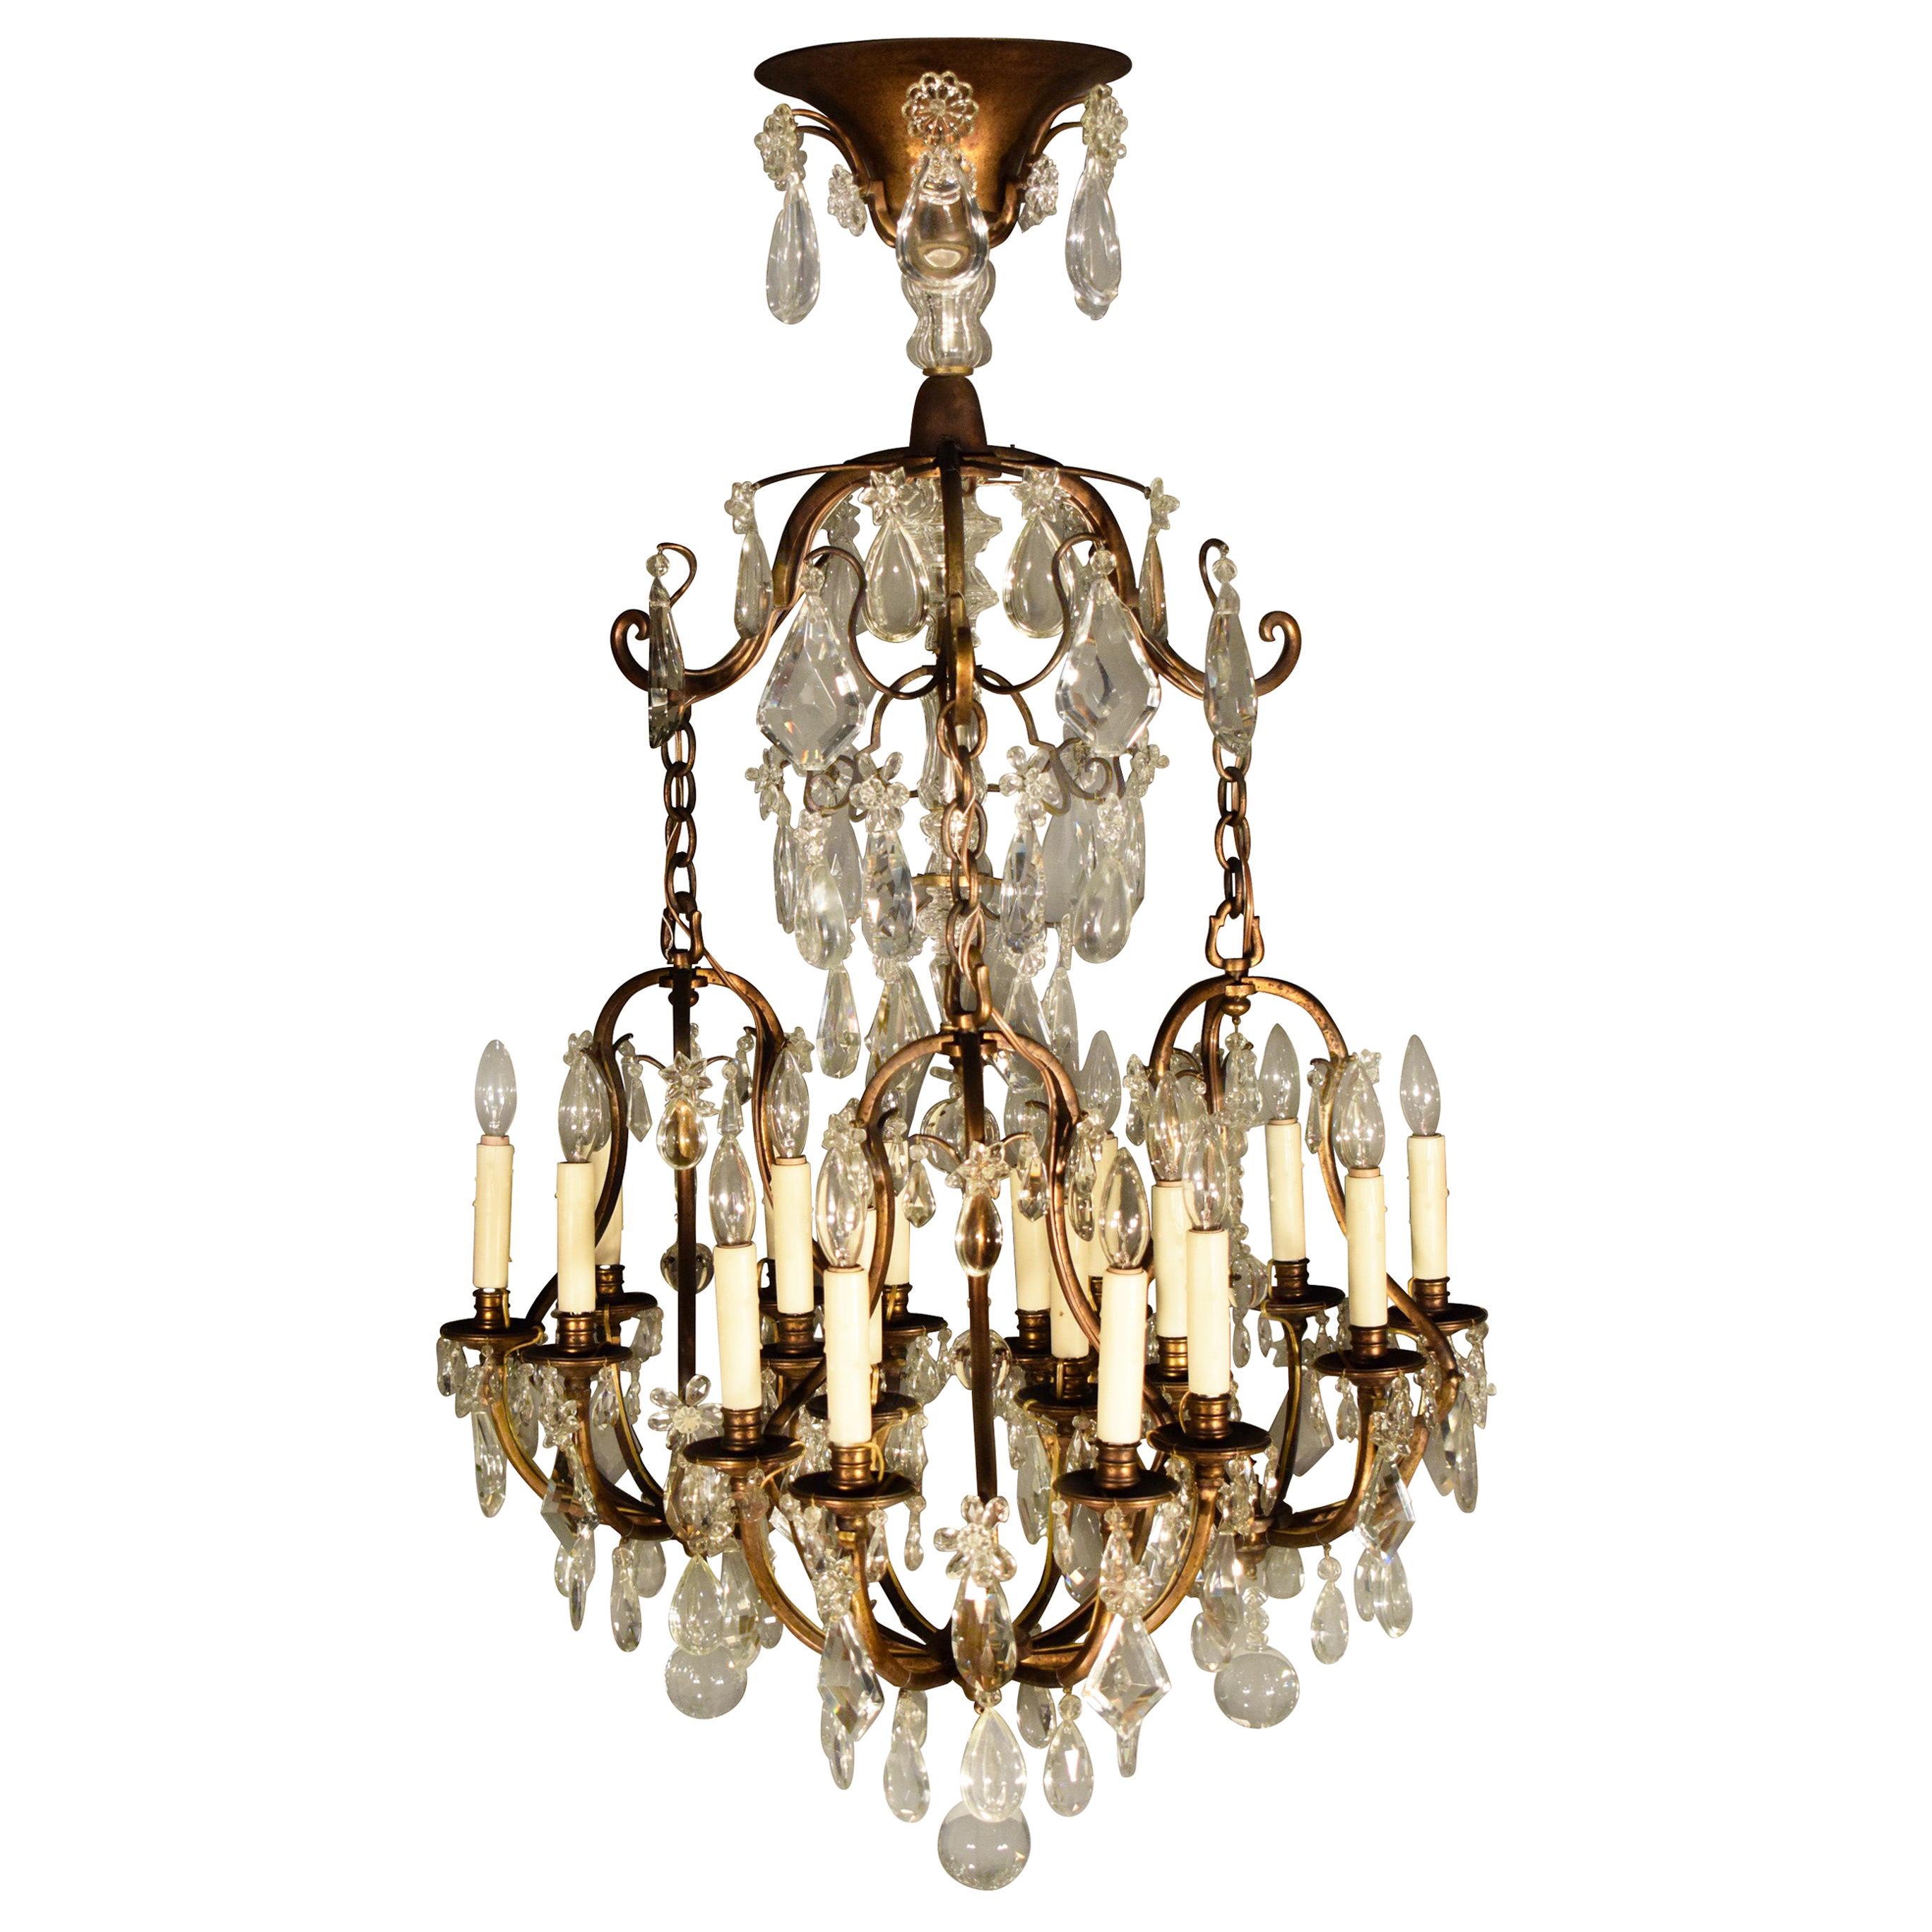 Very Fine 19th Century Gilt Bronze and Crystal Chandelier